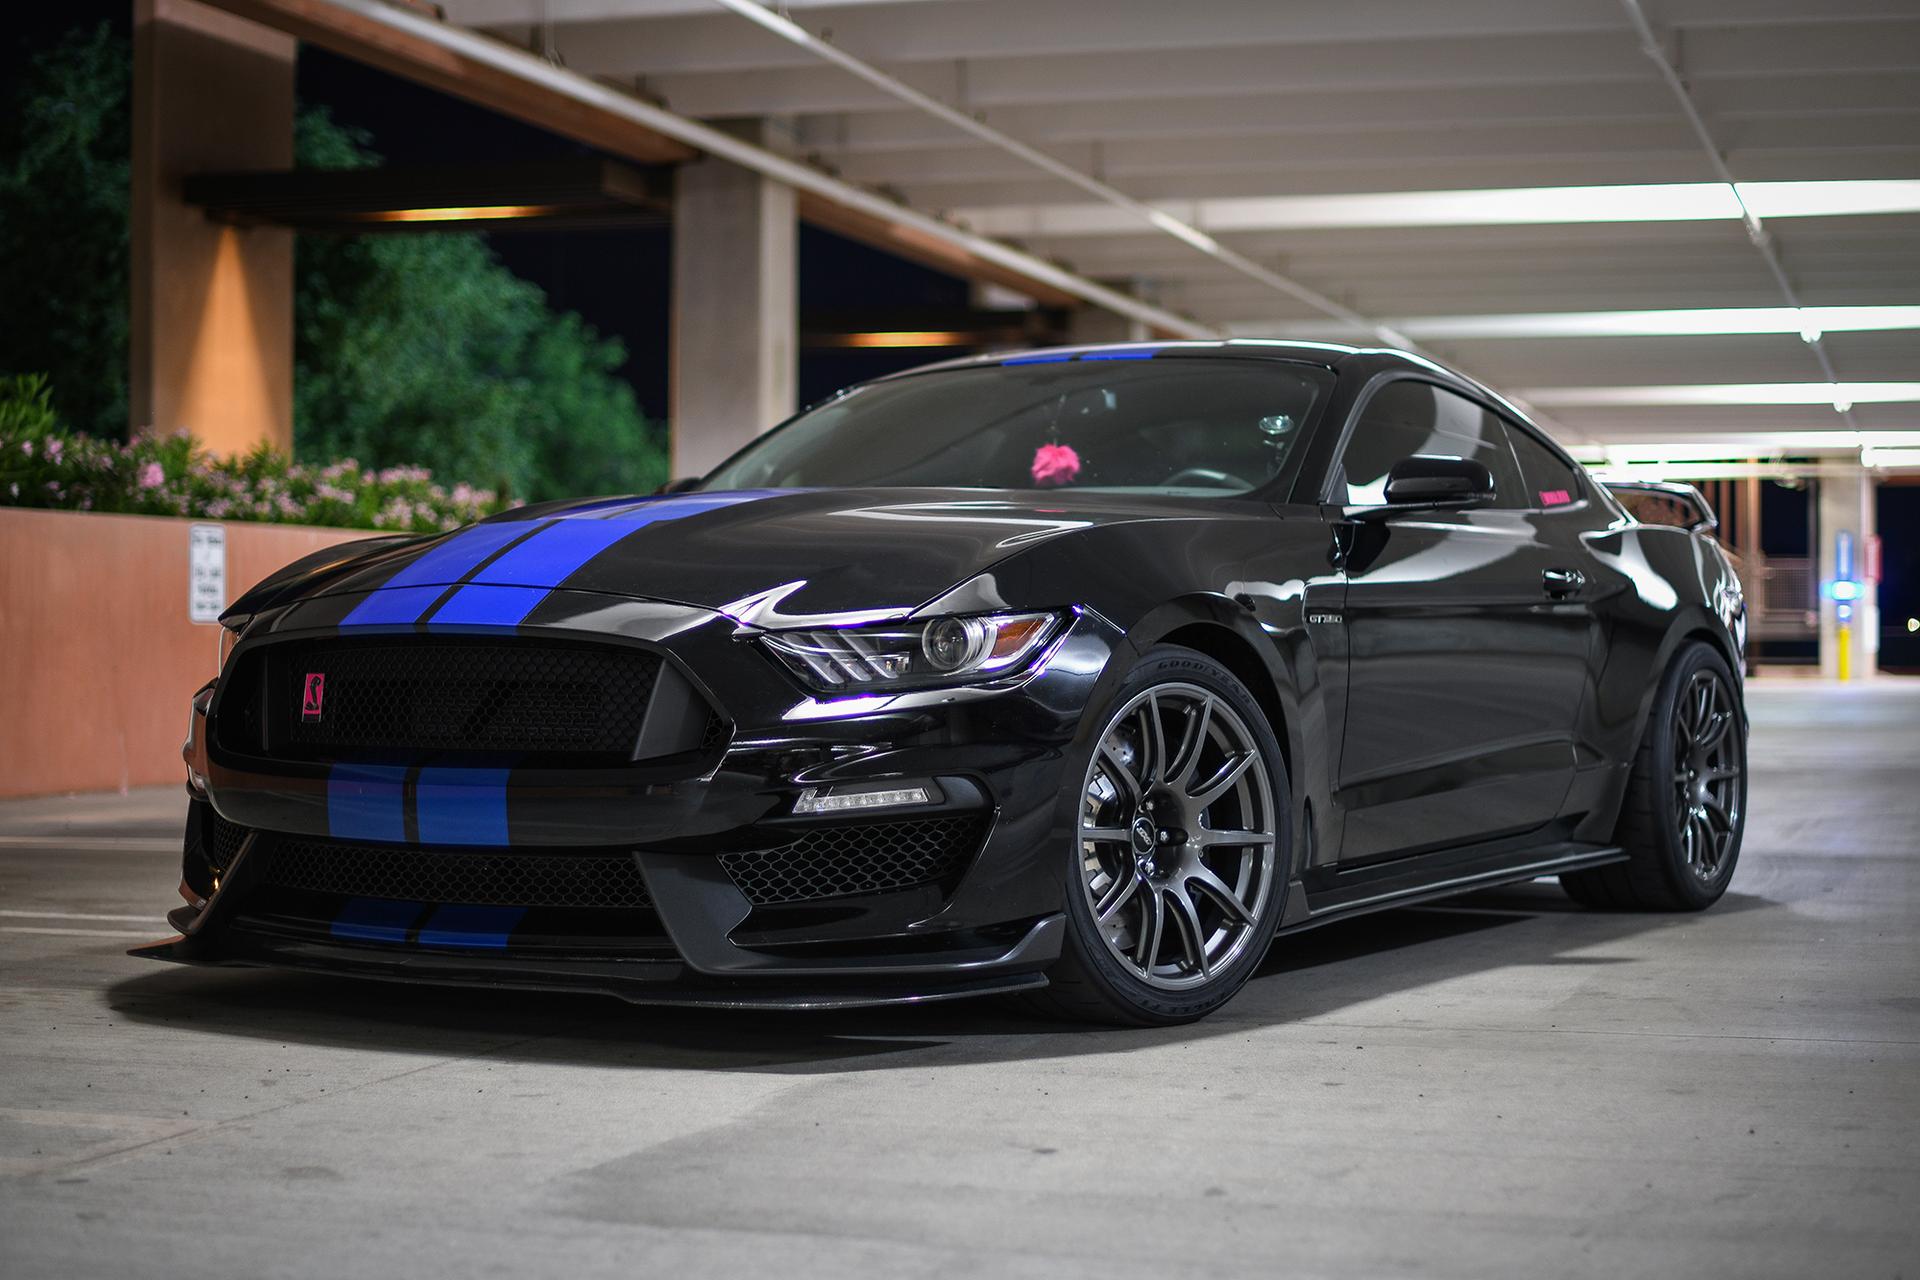 Ford S550 Mustang GT350R with 19" SM-10 in Anthracite